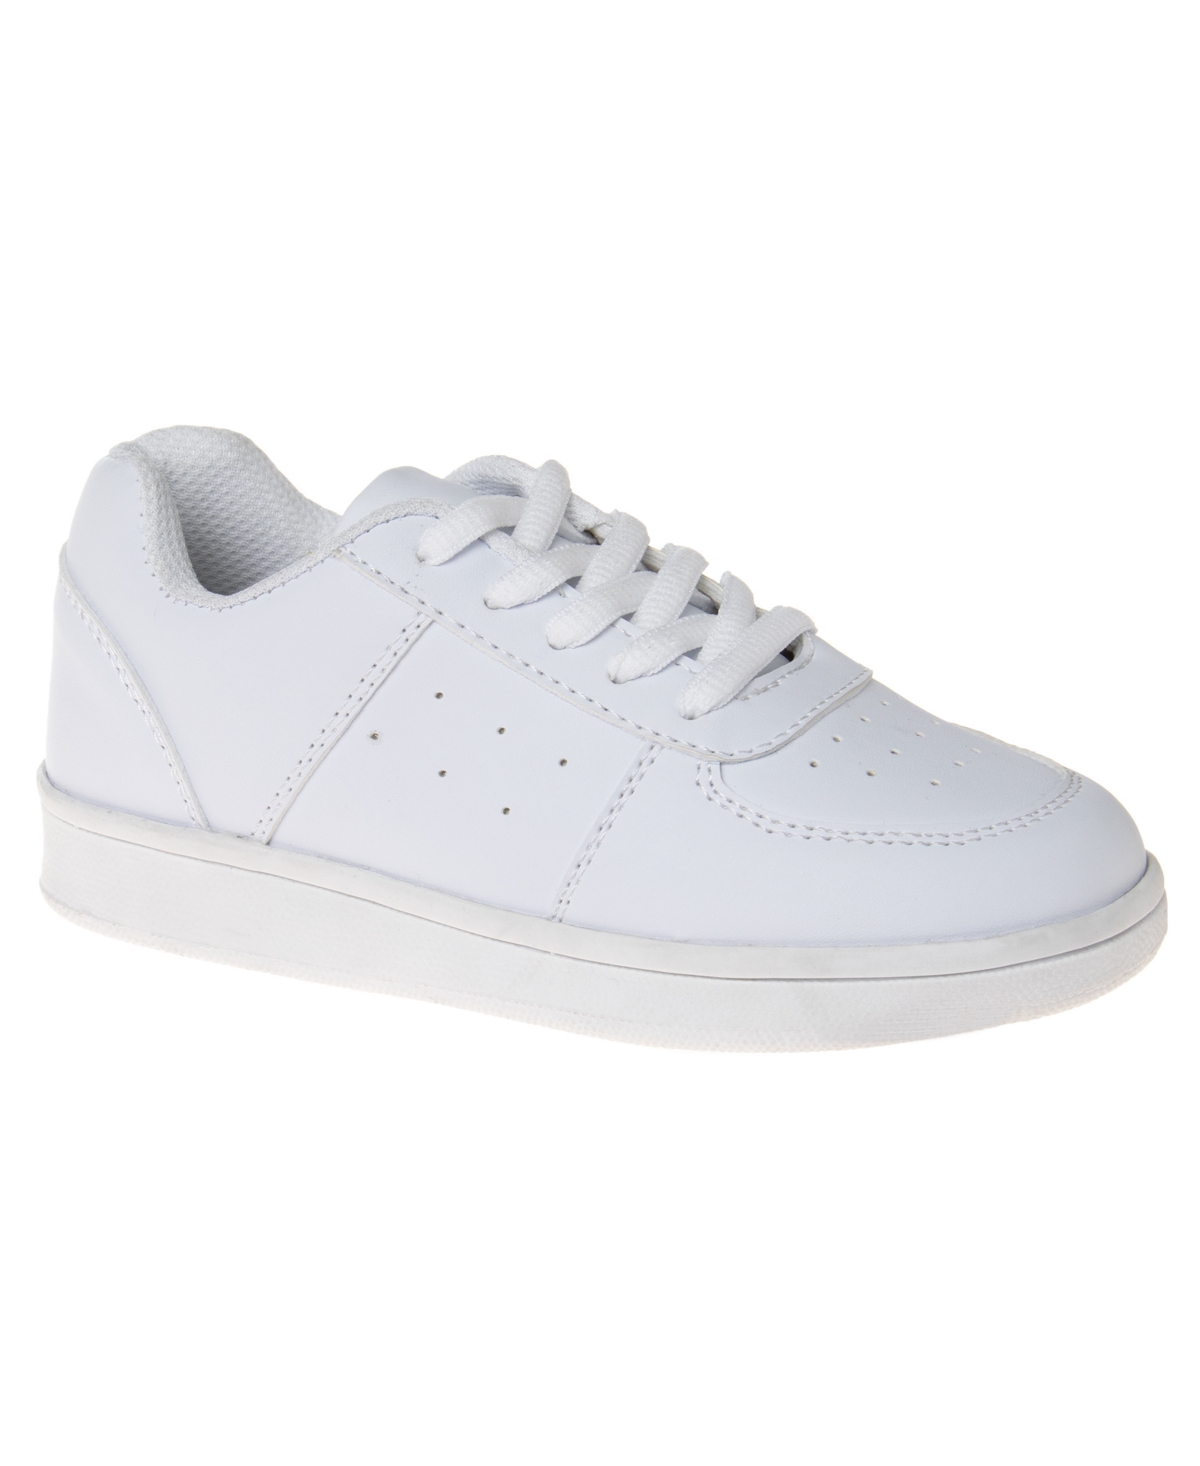 FRENCH TOAST BIG BOYS SCHOOL CONSTRUCTION SNEAKERS